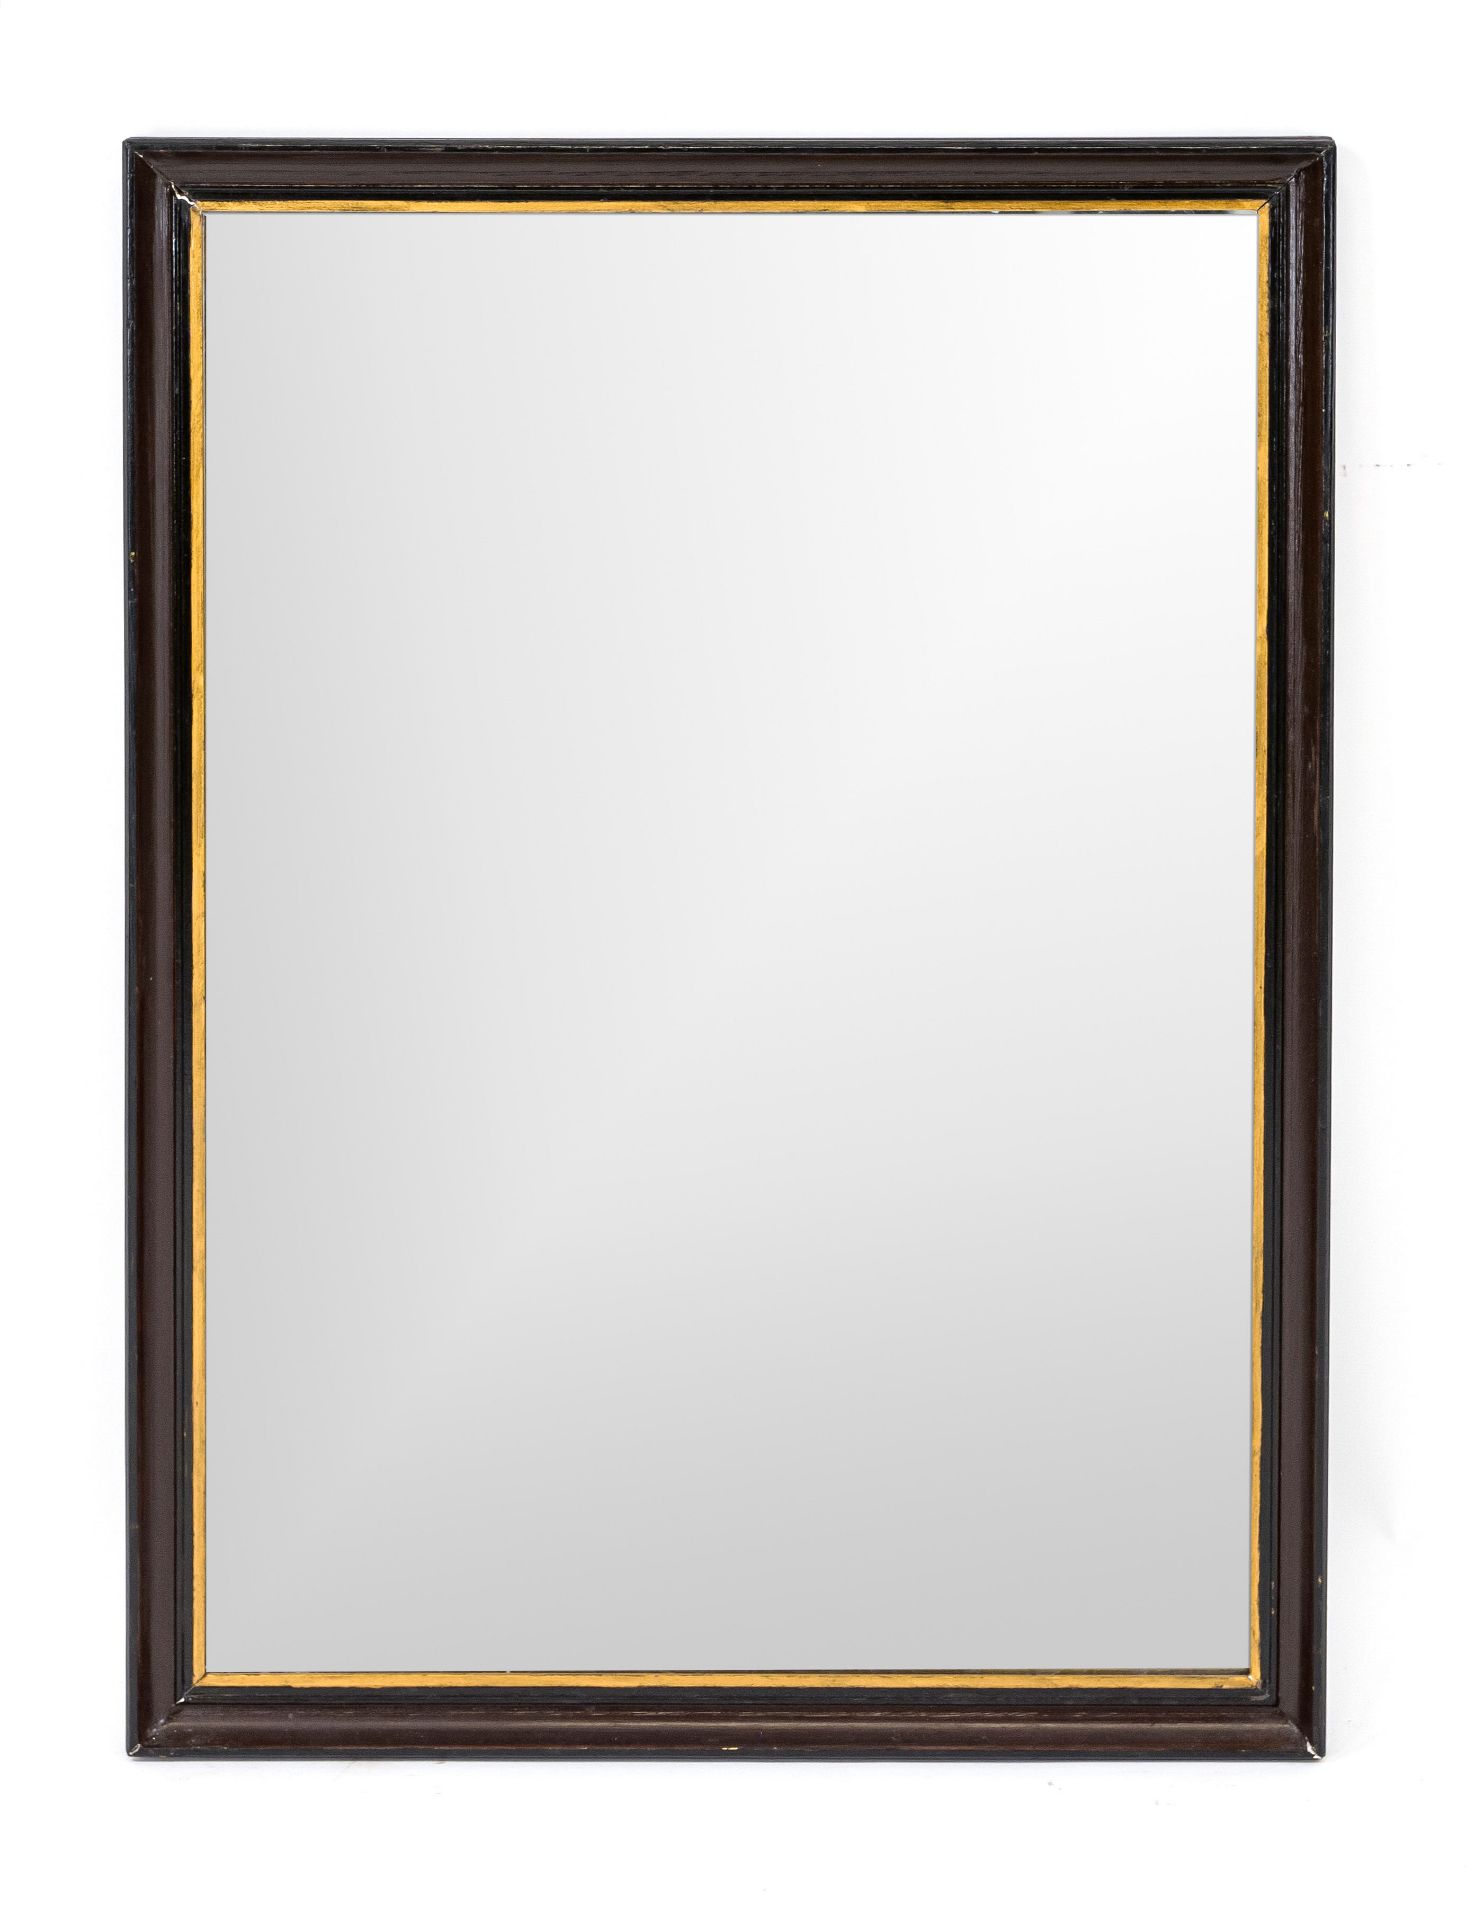 Wall mirror with wooden frame, 20th century, 82 x 58 cm